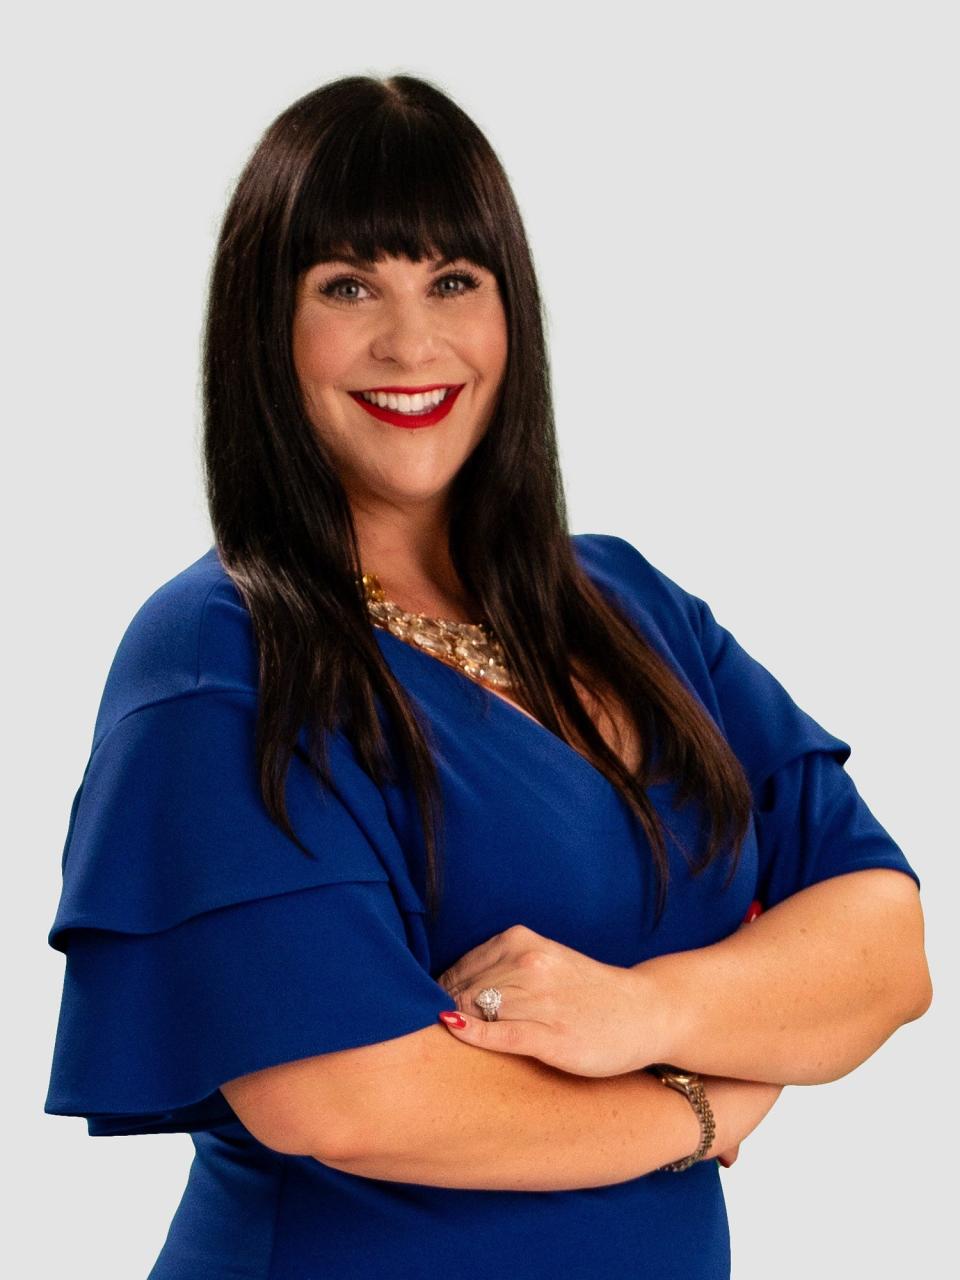 Osage Beach real estate agent Cierra Grein will be featured in HGTV's new eight-episode series, "Lakefront Empire." The series is about real estate agents working at the Lake of the Ozarks.